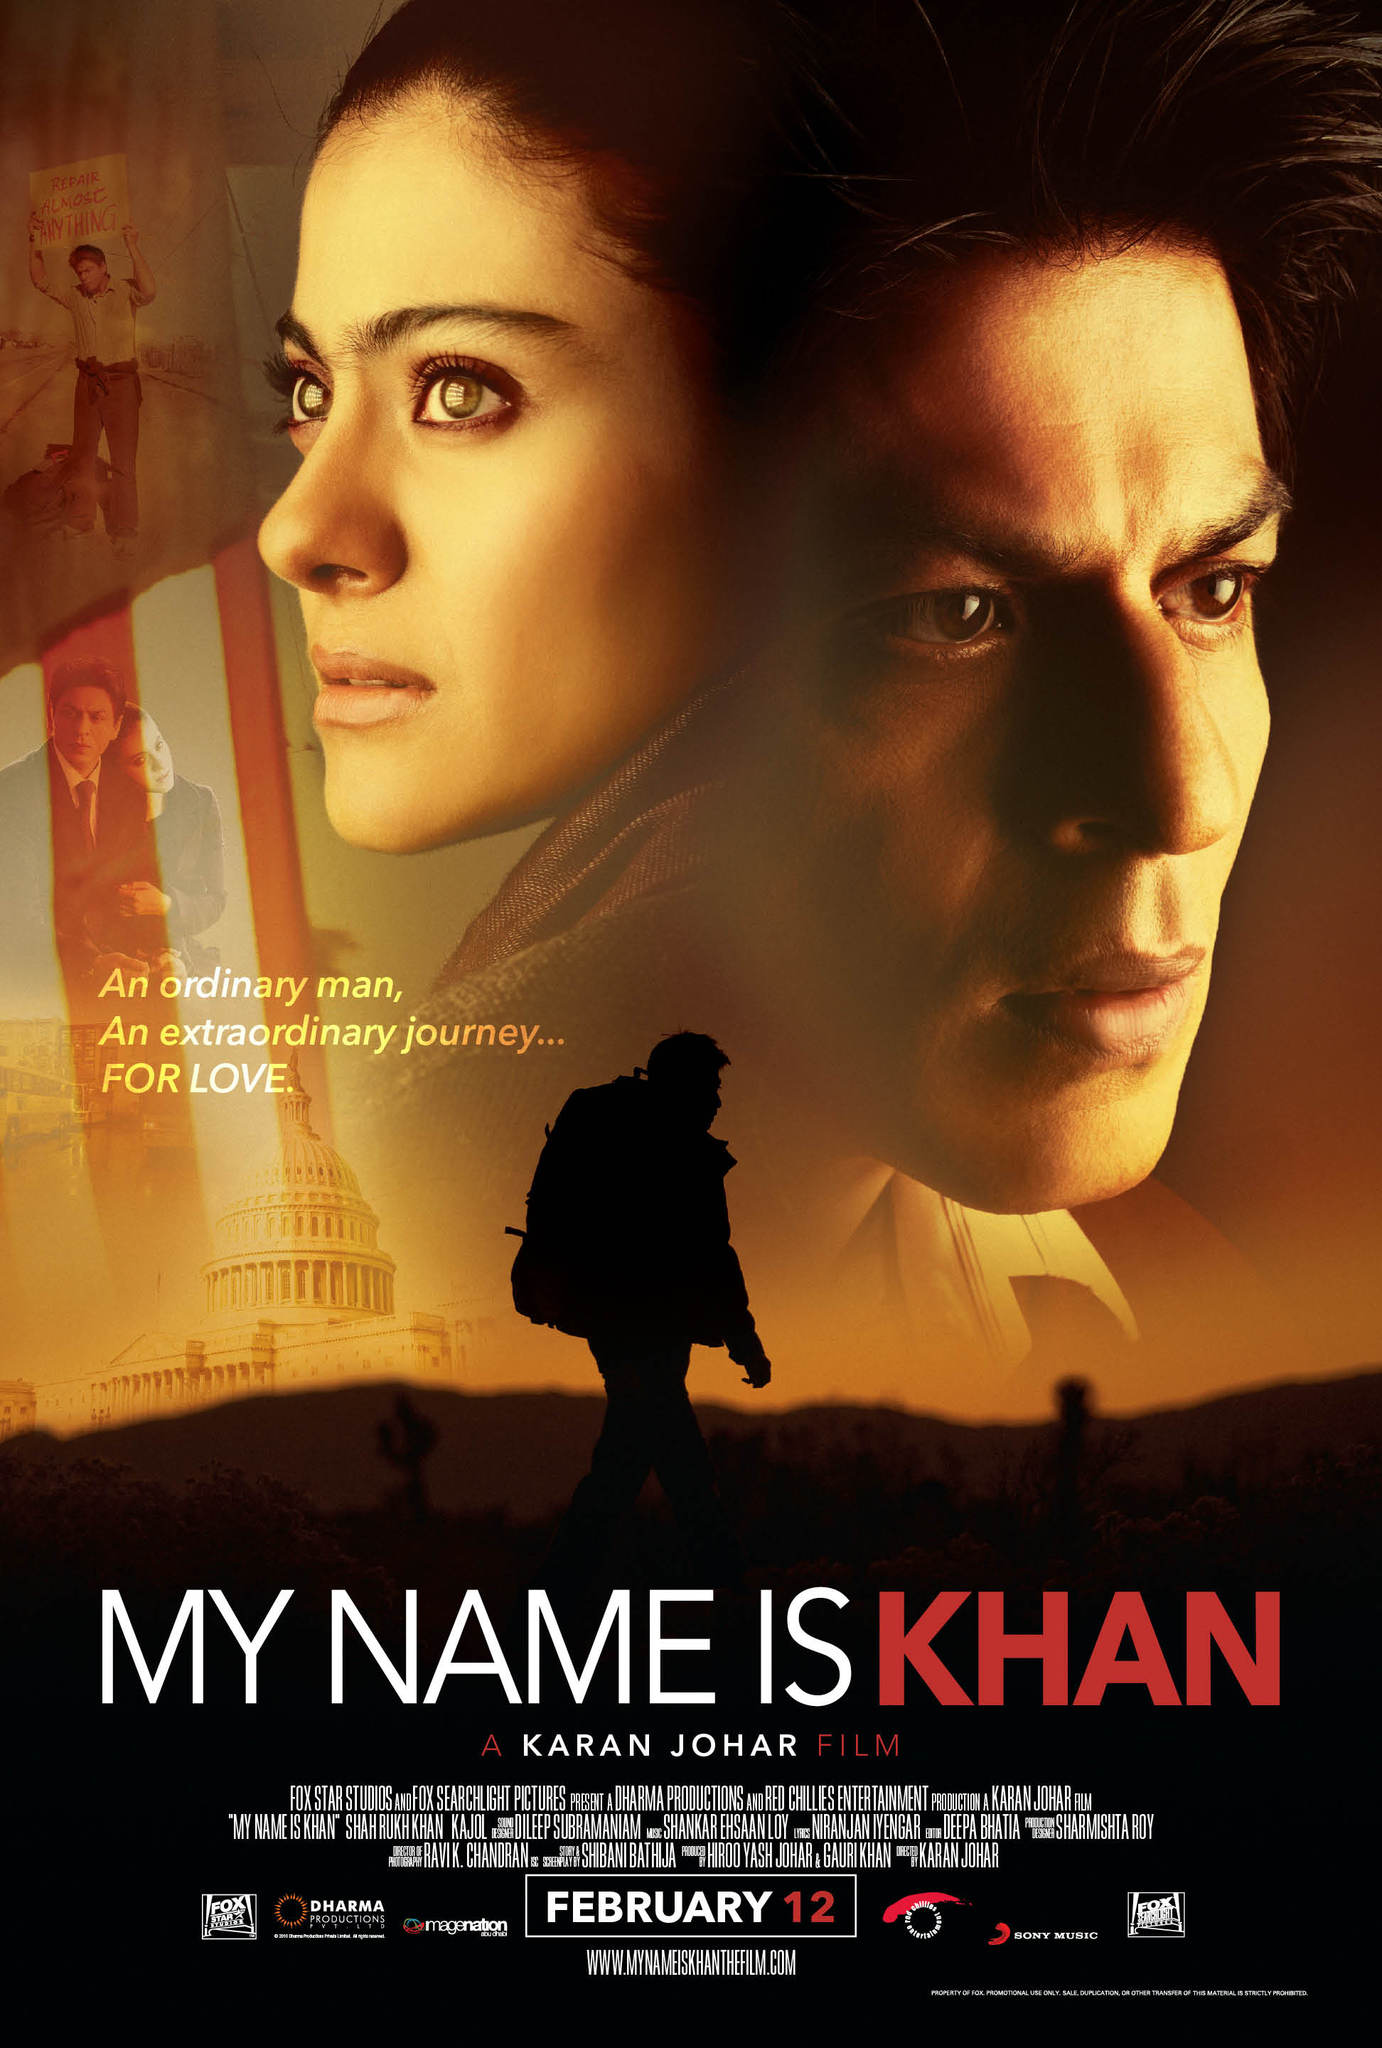 My name is khan movie bollywood